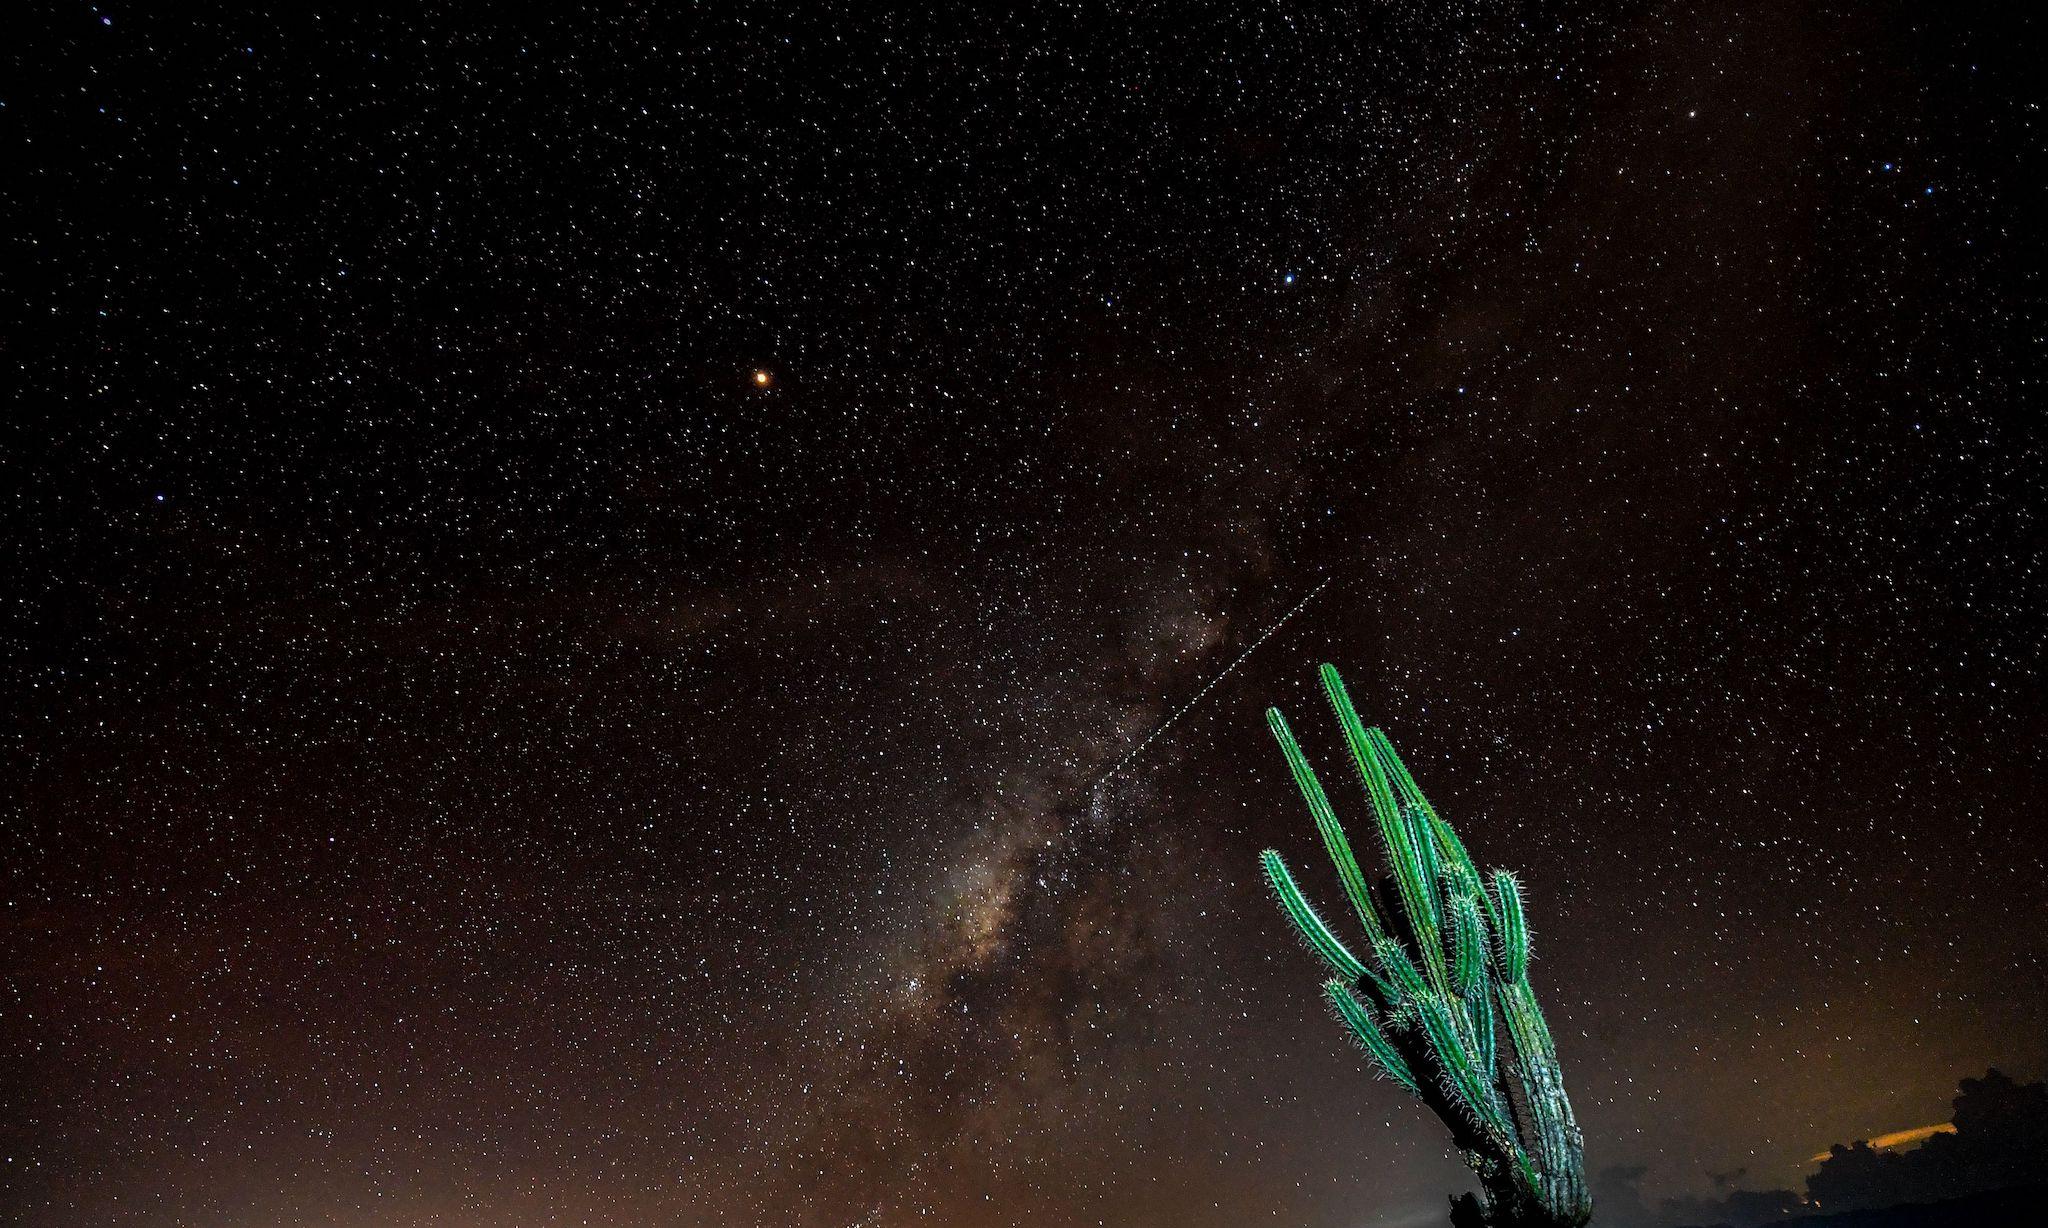 View of a prickly pear and the Milky Way in the sky over the Tatacoa Desert, in the department of Huila, Colombia, on October 11, 2018